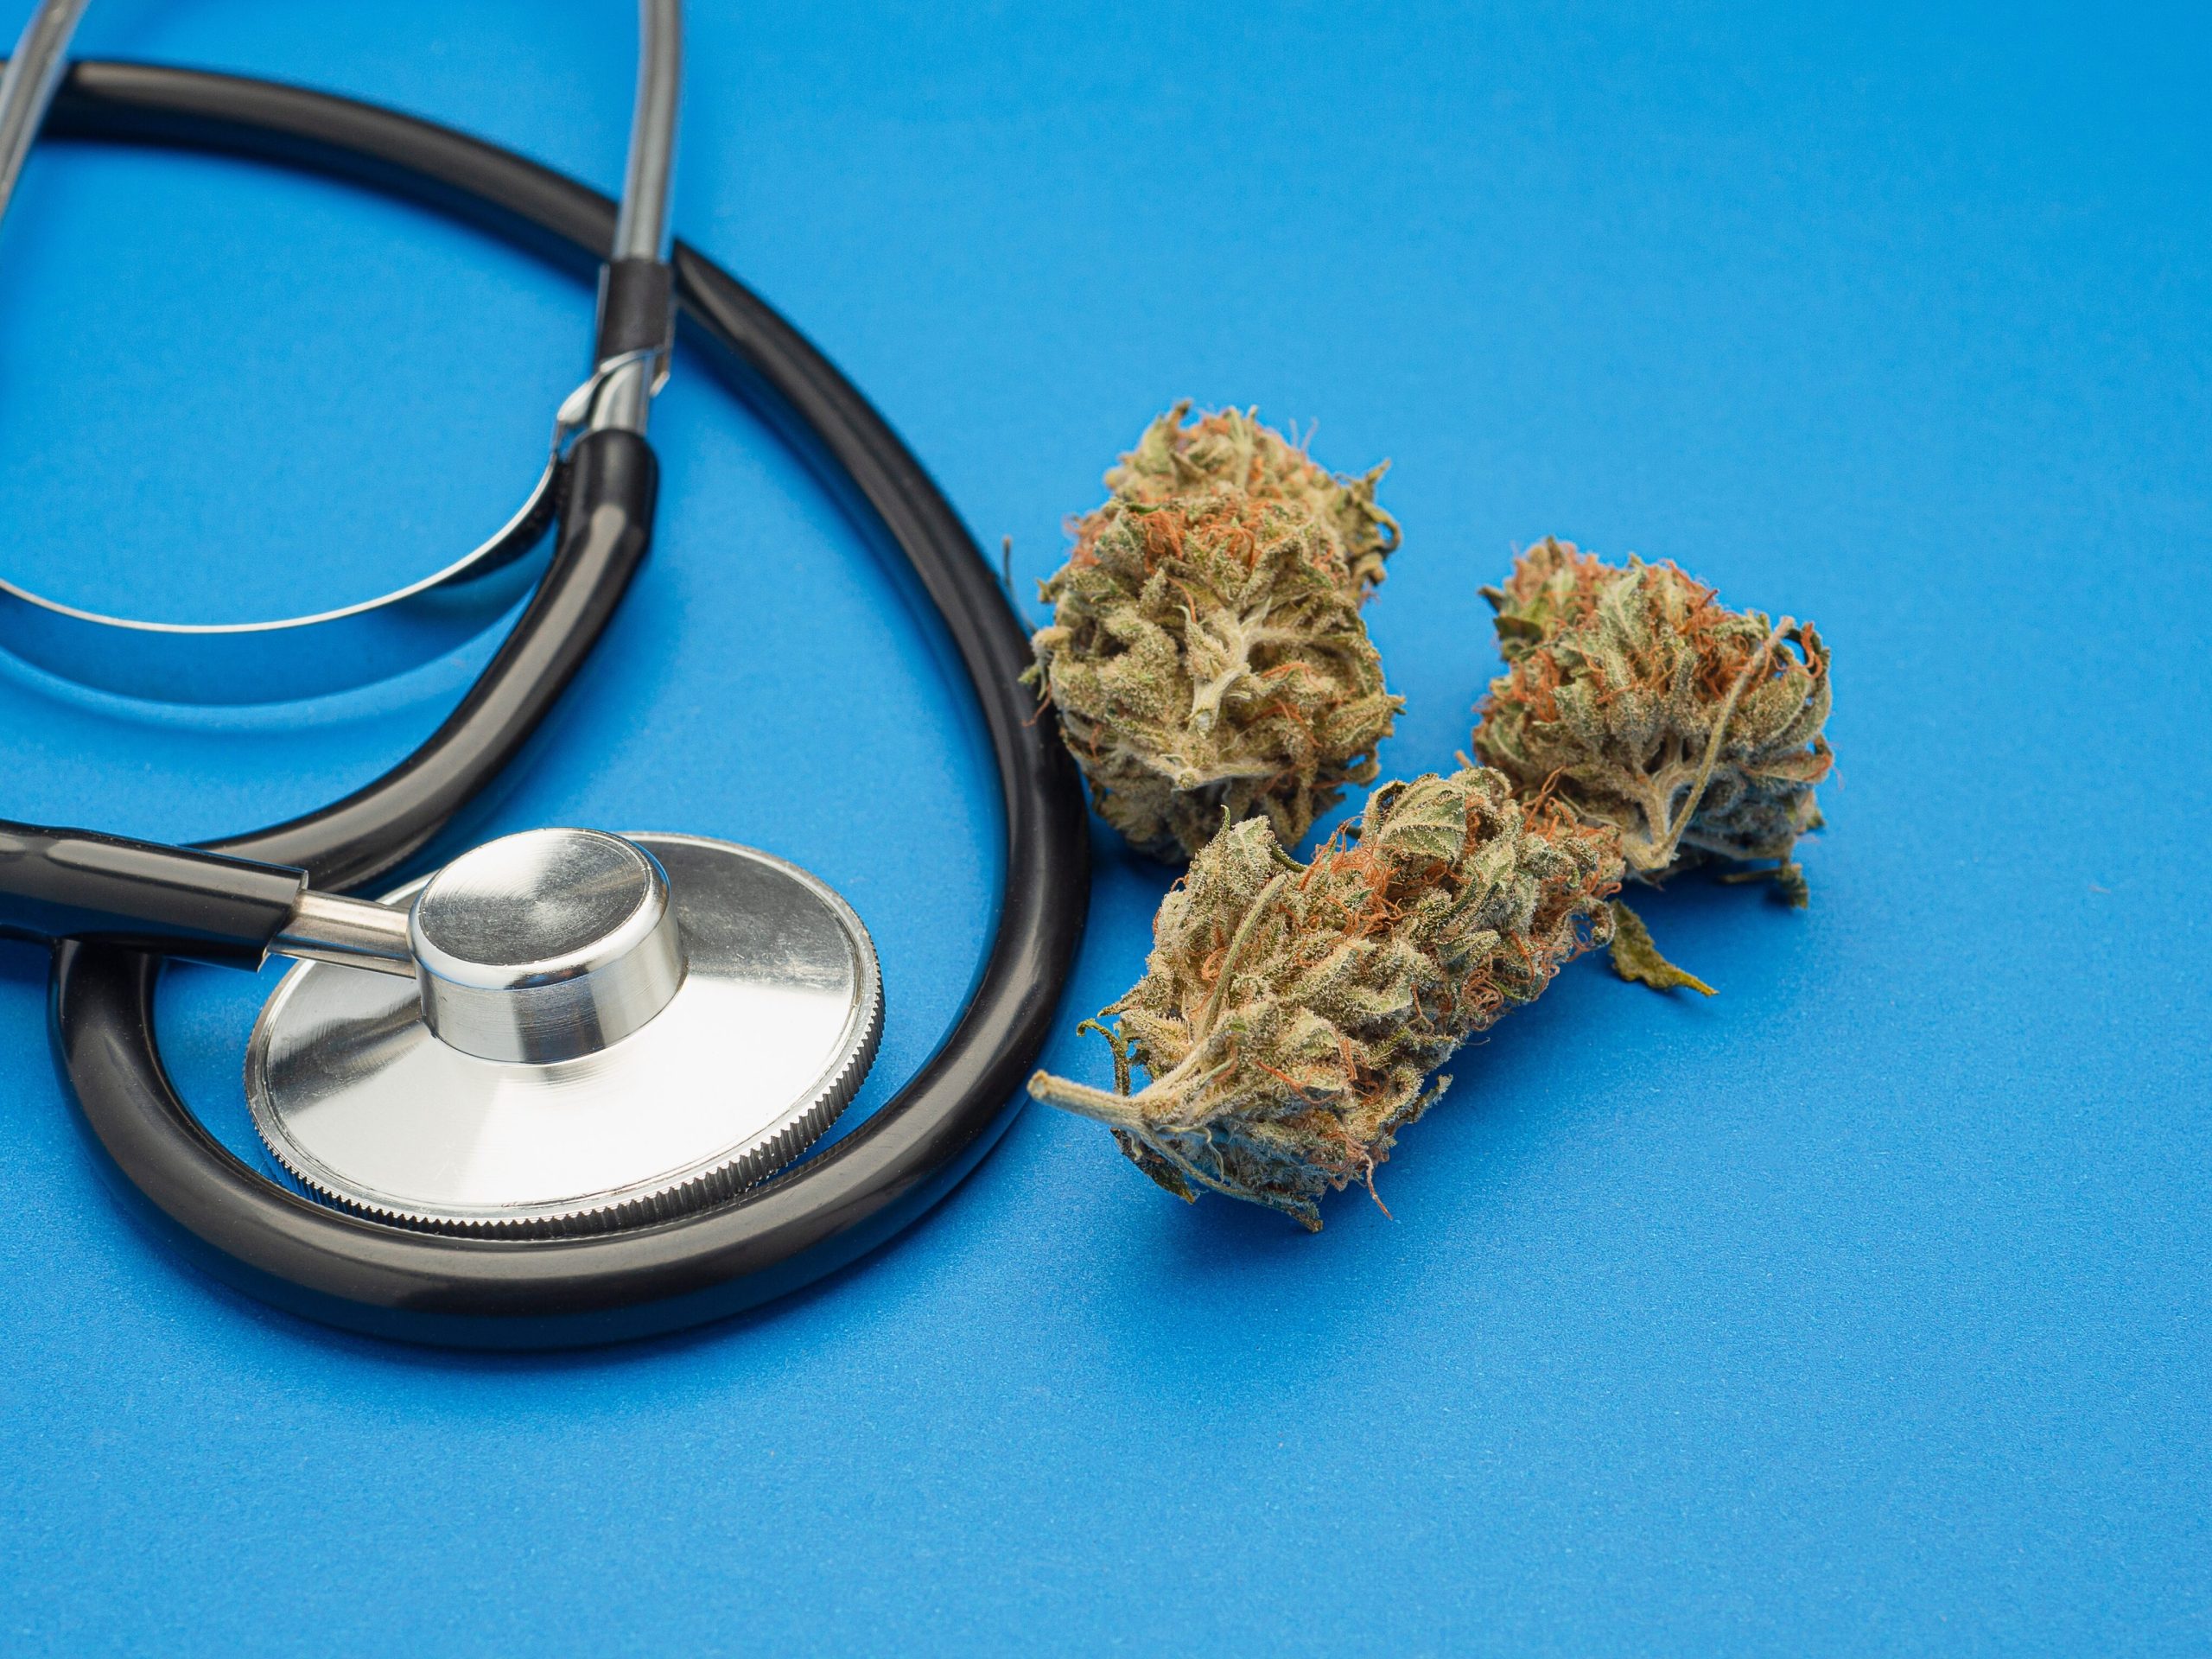 Survey: Most Physicians Report Lack of Medical MJ Knowledge To Guide Treatments